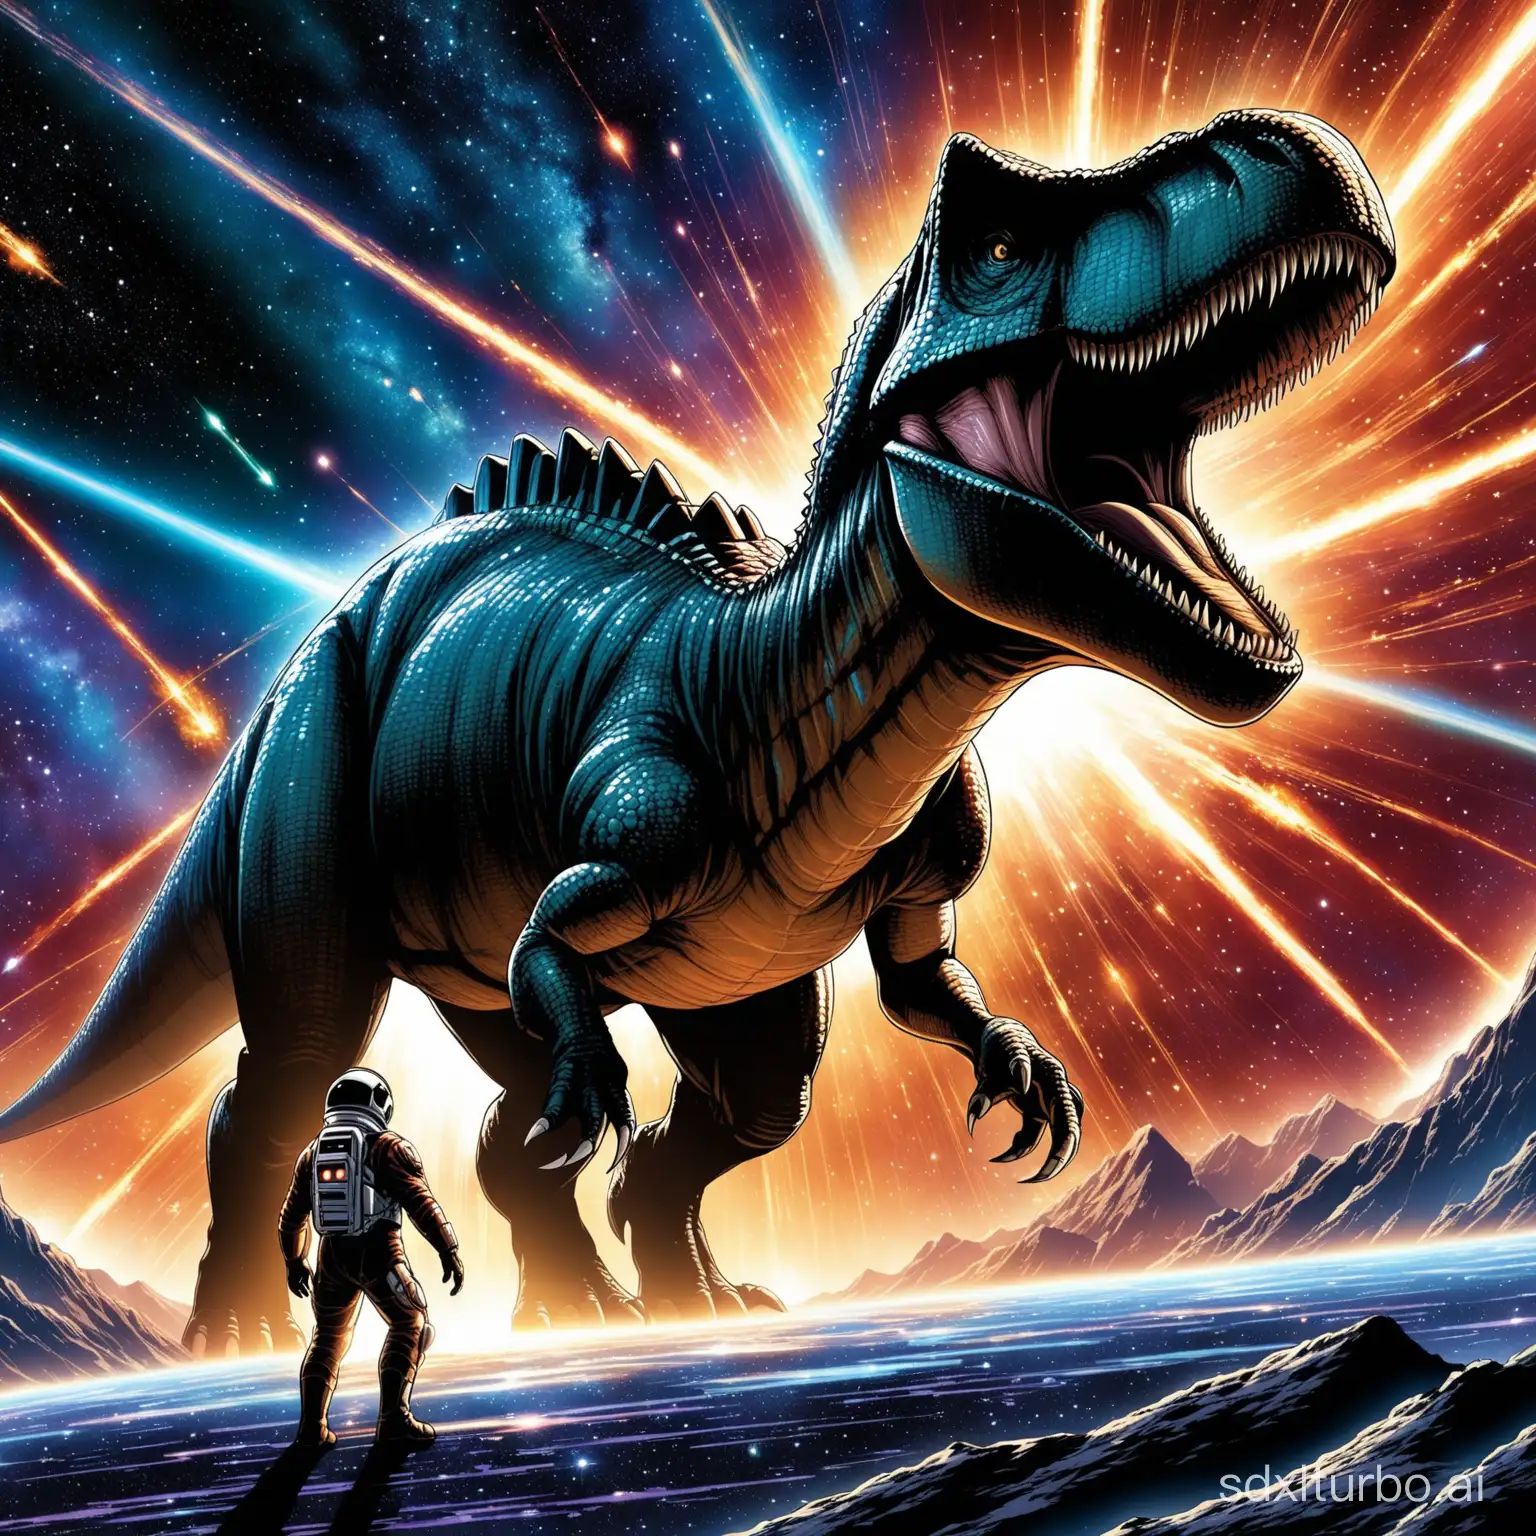 In the universe, there was a dinosaur big bang, fighting against viruses, and in the end, it was humans and gods working together to save the universe in the interstellar war.